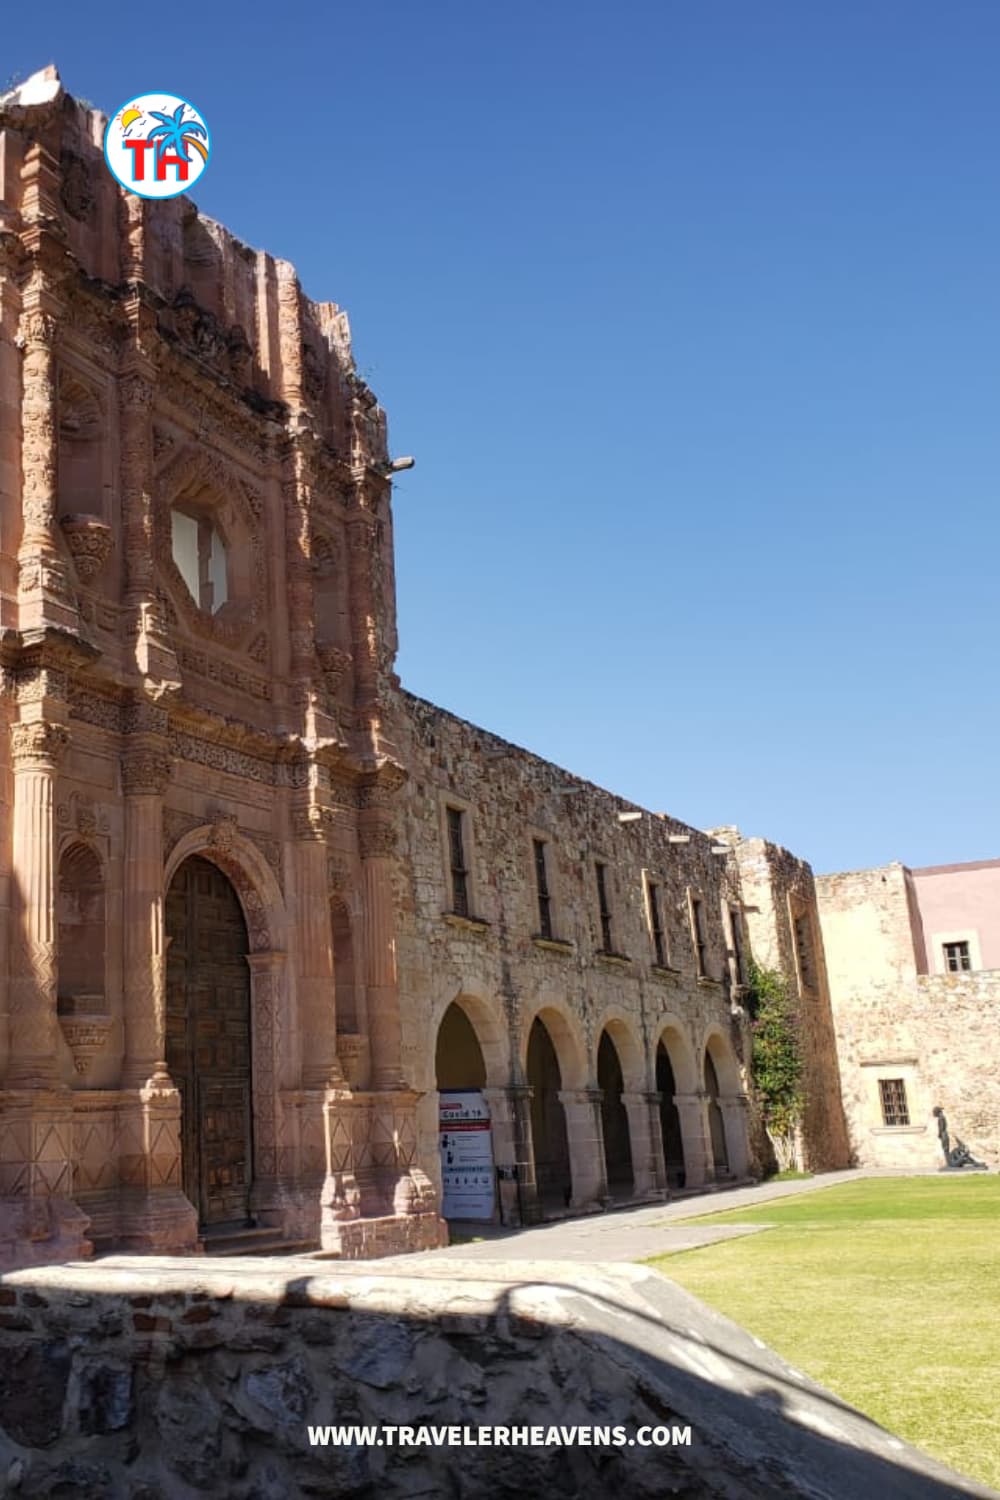 Beautiful Destinations, Best Places to Visit in Zacatecas, Mexico, Mexico Best Places, Mexico Travel Guide, Travel to Zacatecas, Visit Zacatecas